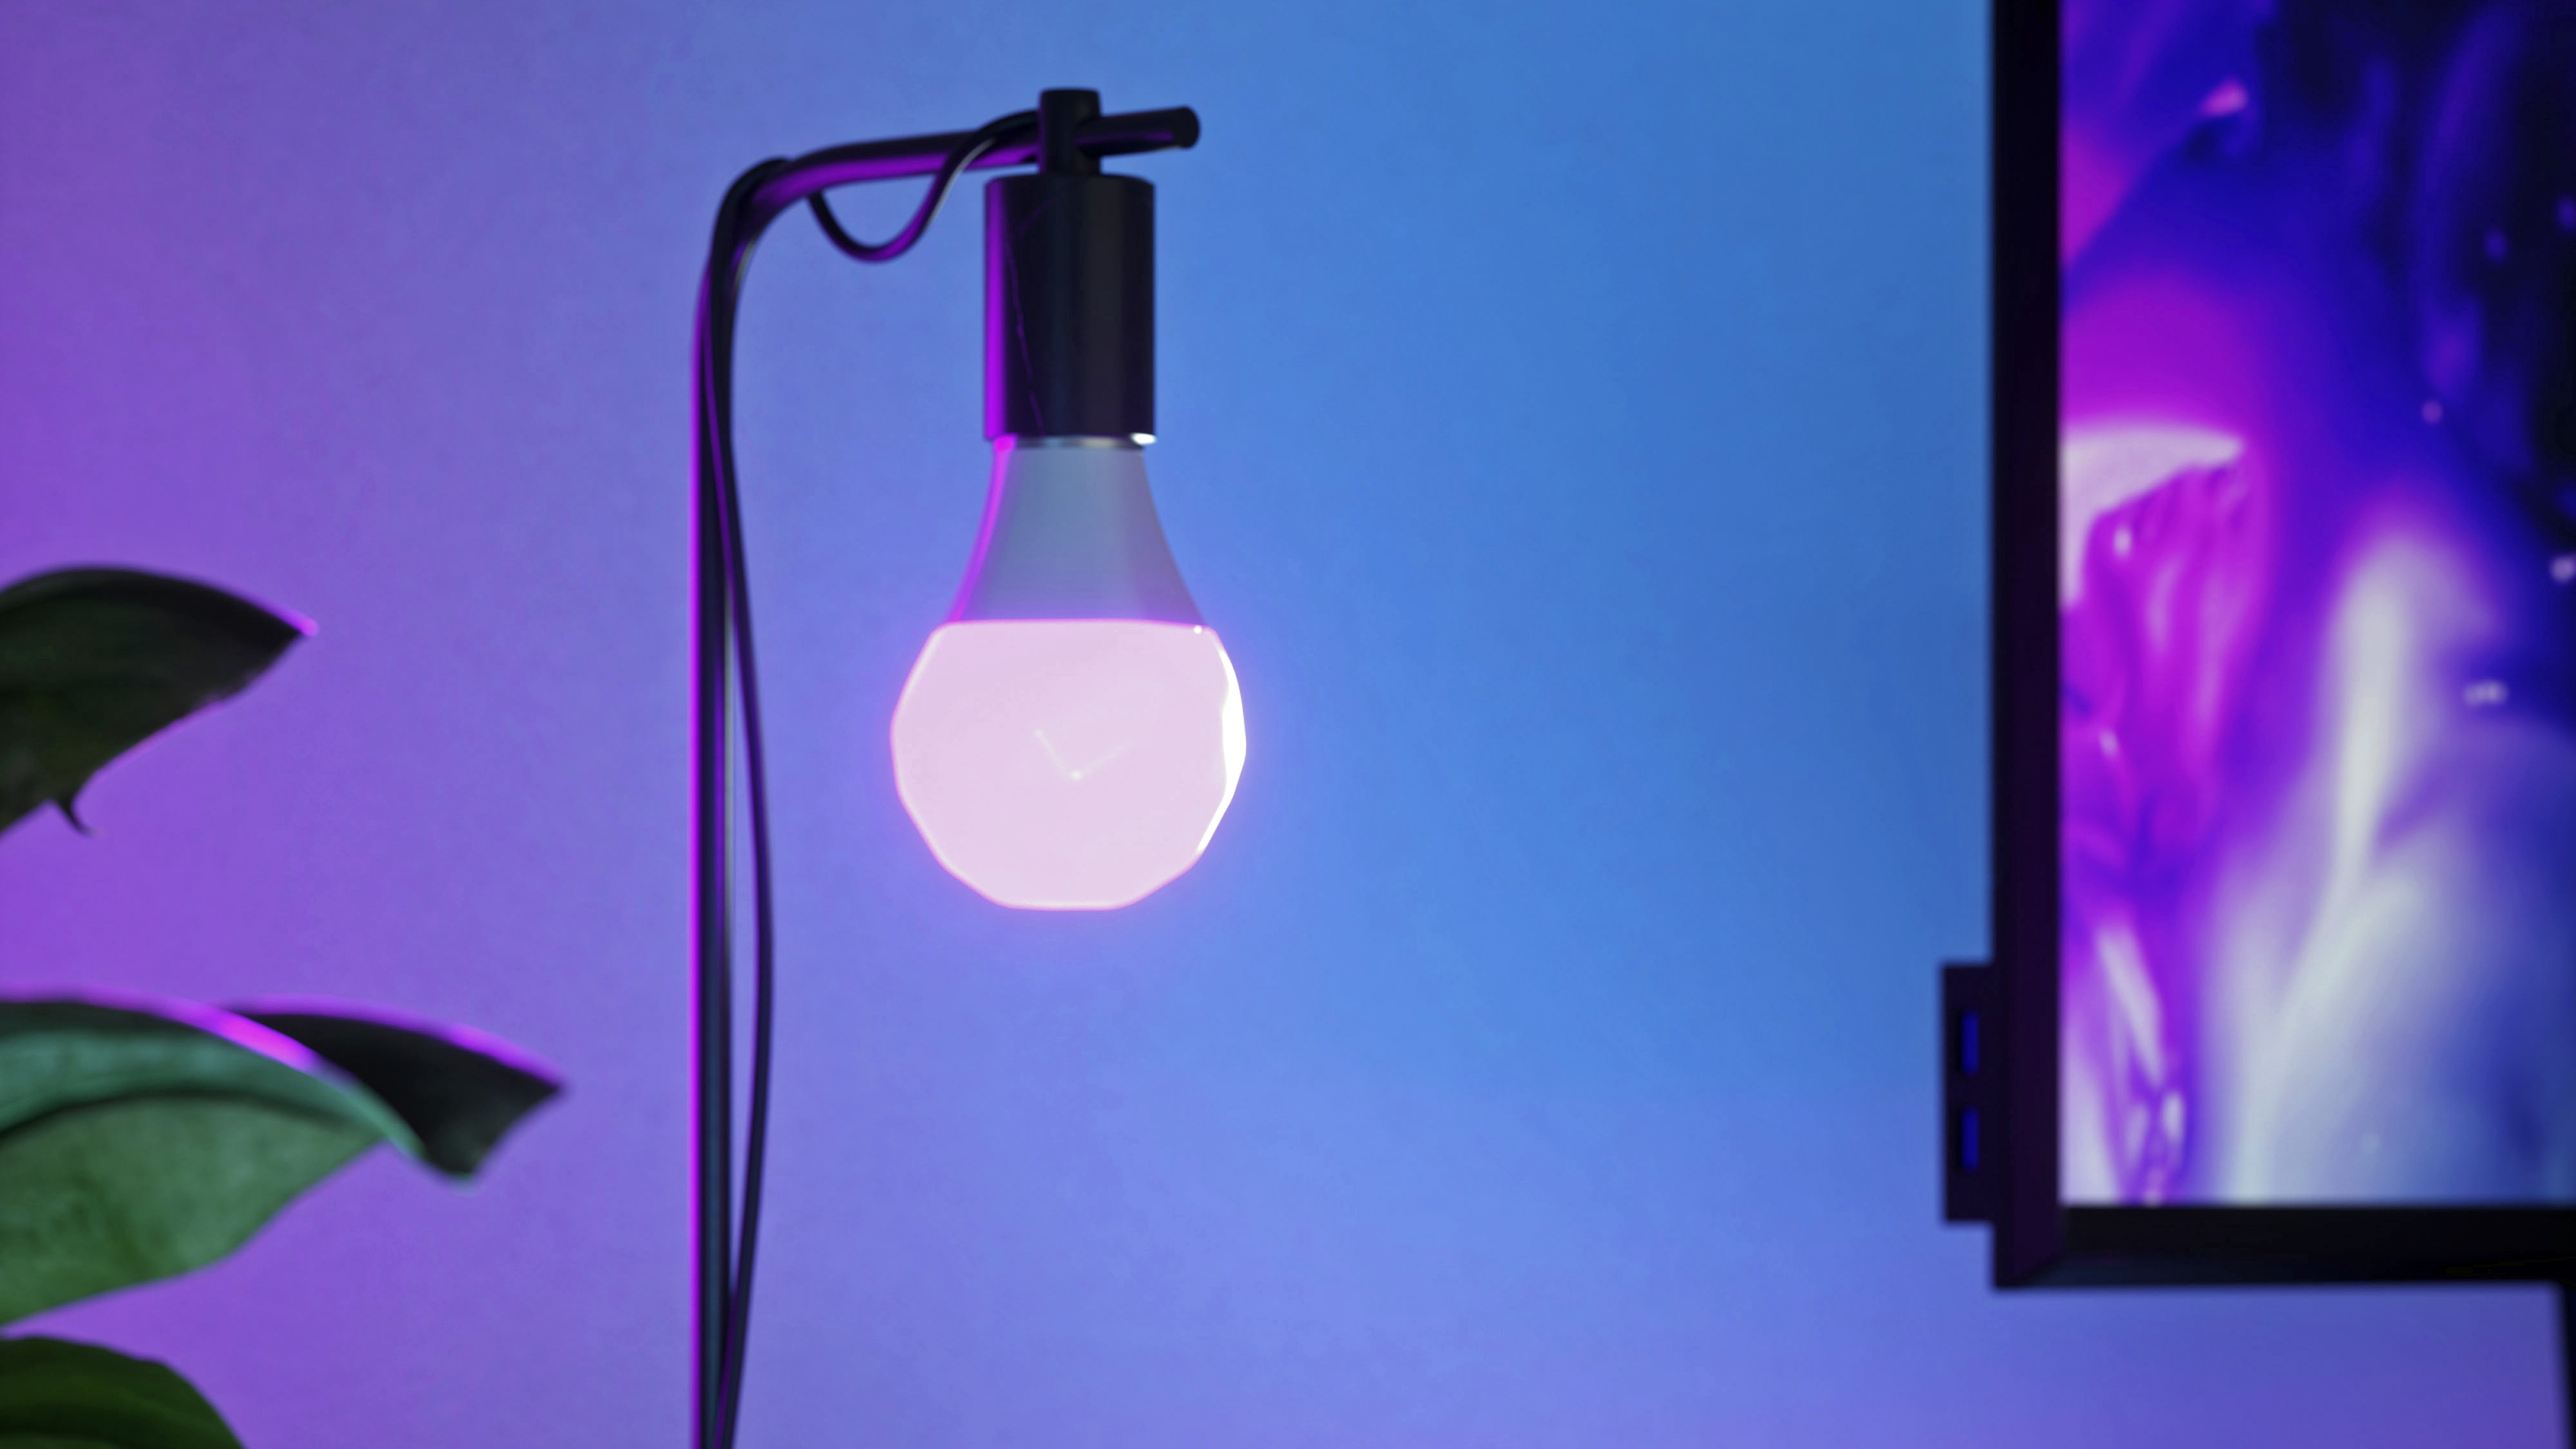 Innr's affordable A19 bulbs aren't worth the trouble for Hue users